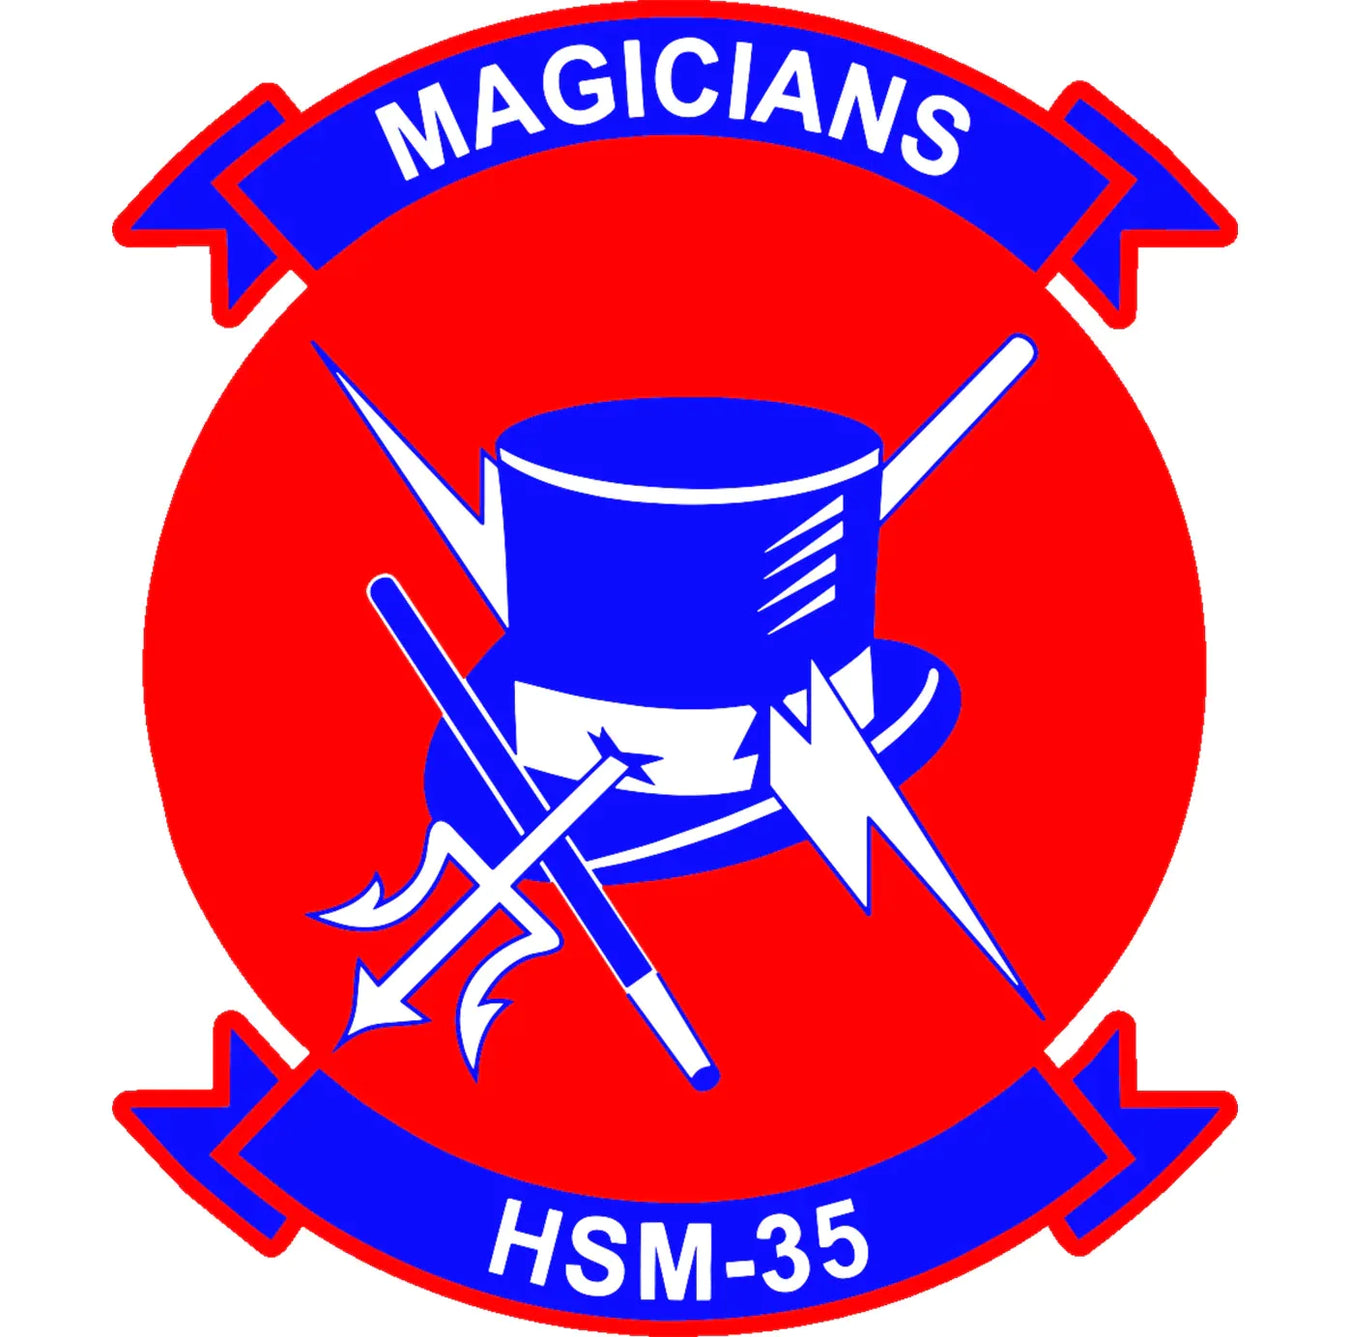 Helicopter Maritime Strike Squadron 35 (HSM-35) "Magicians"